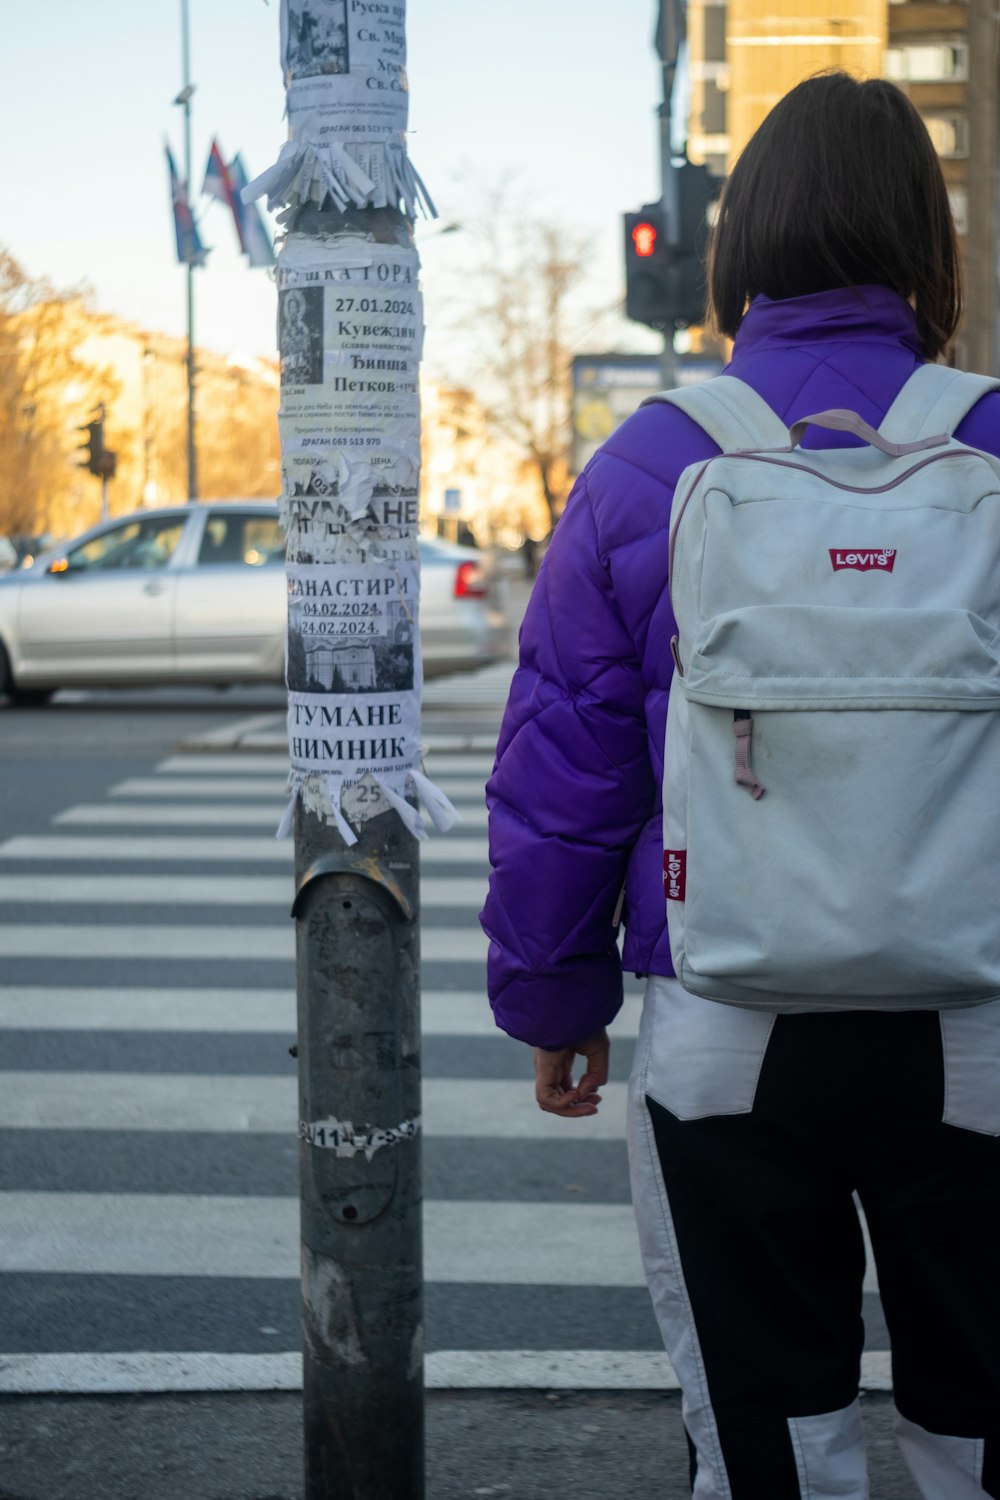 a person in a purple jacket is walking down the street